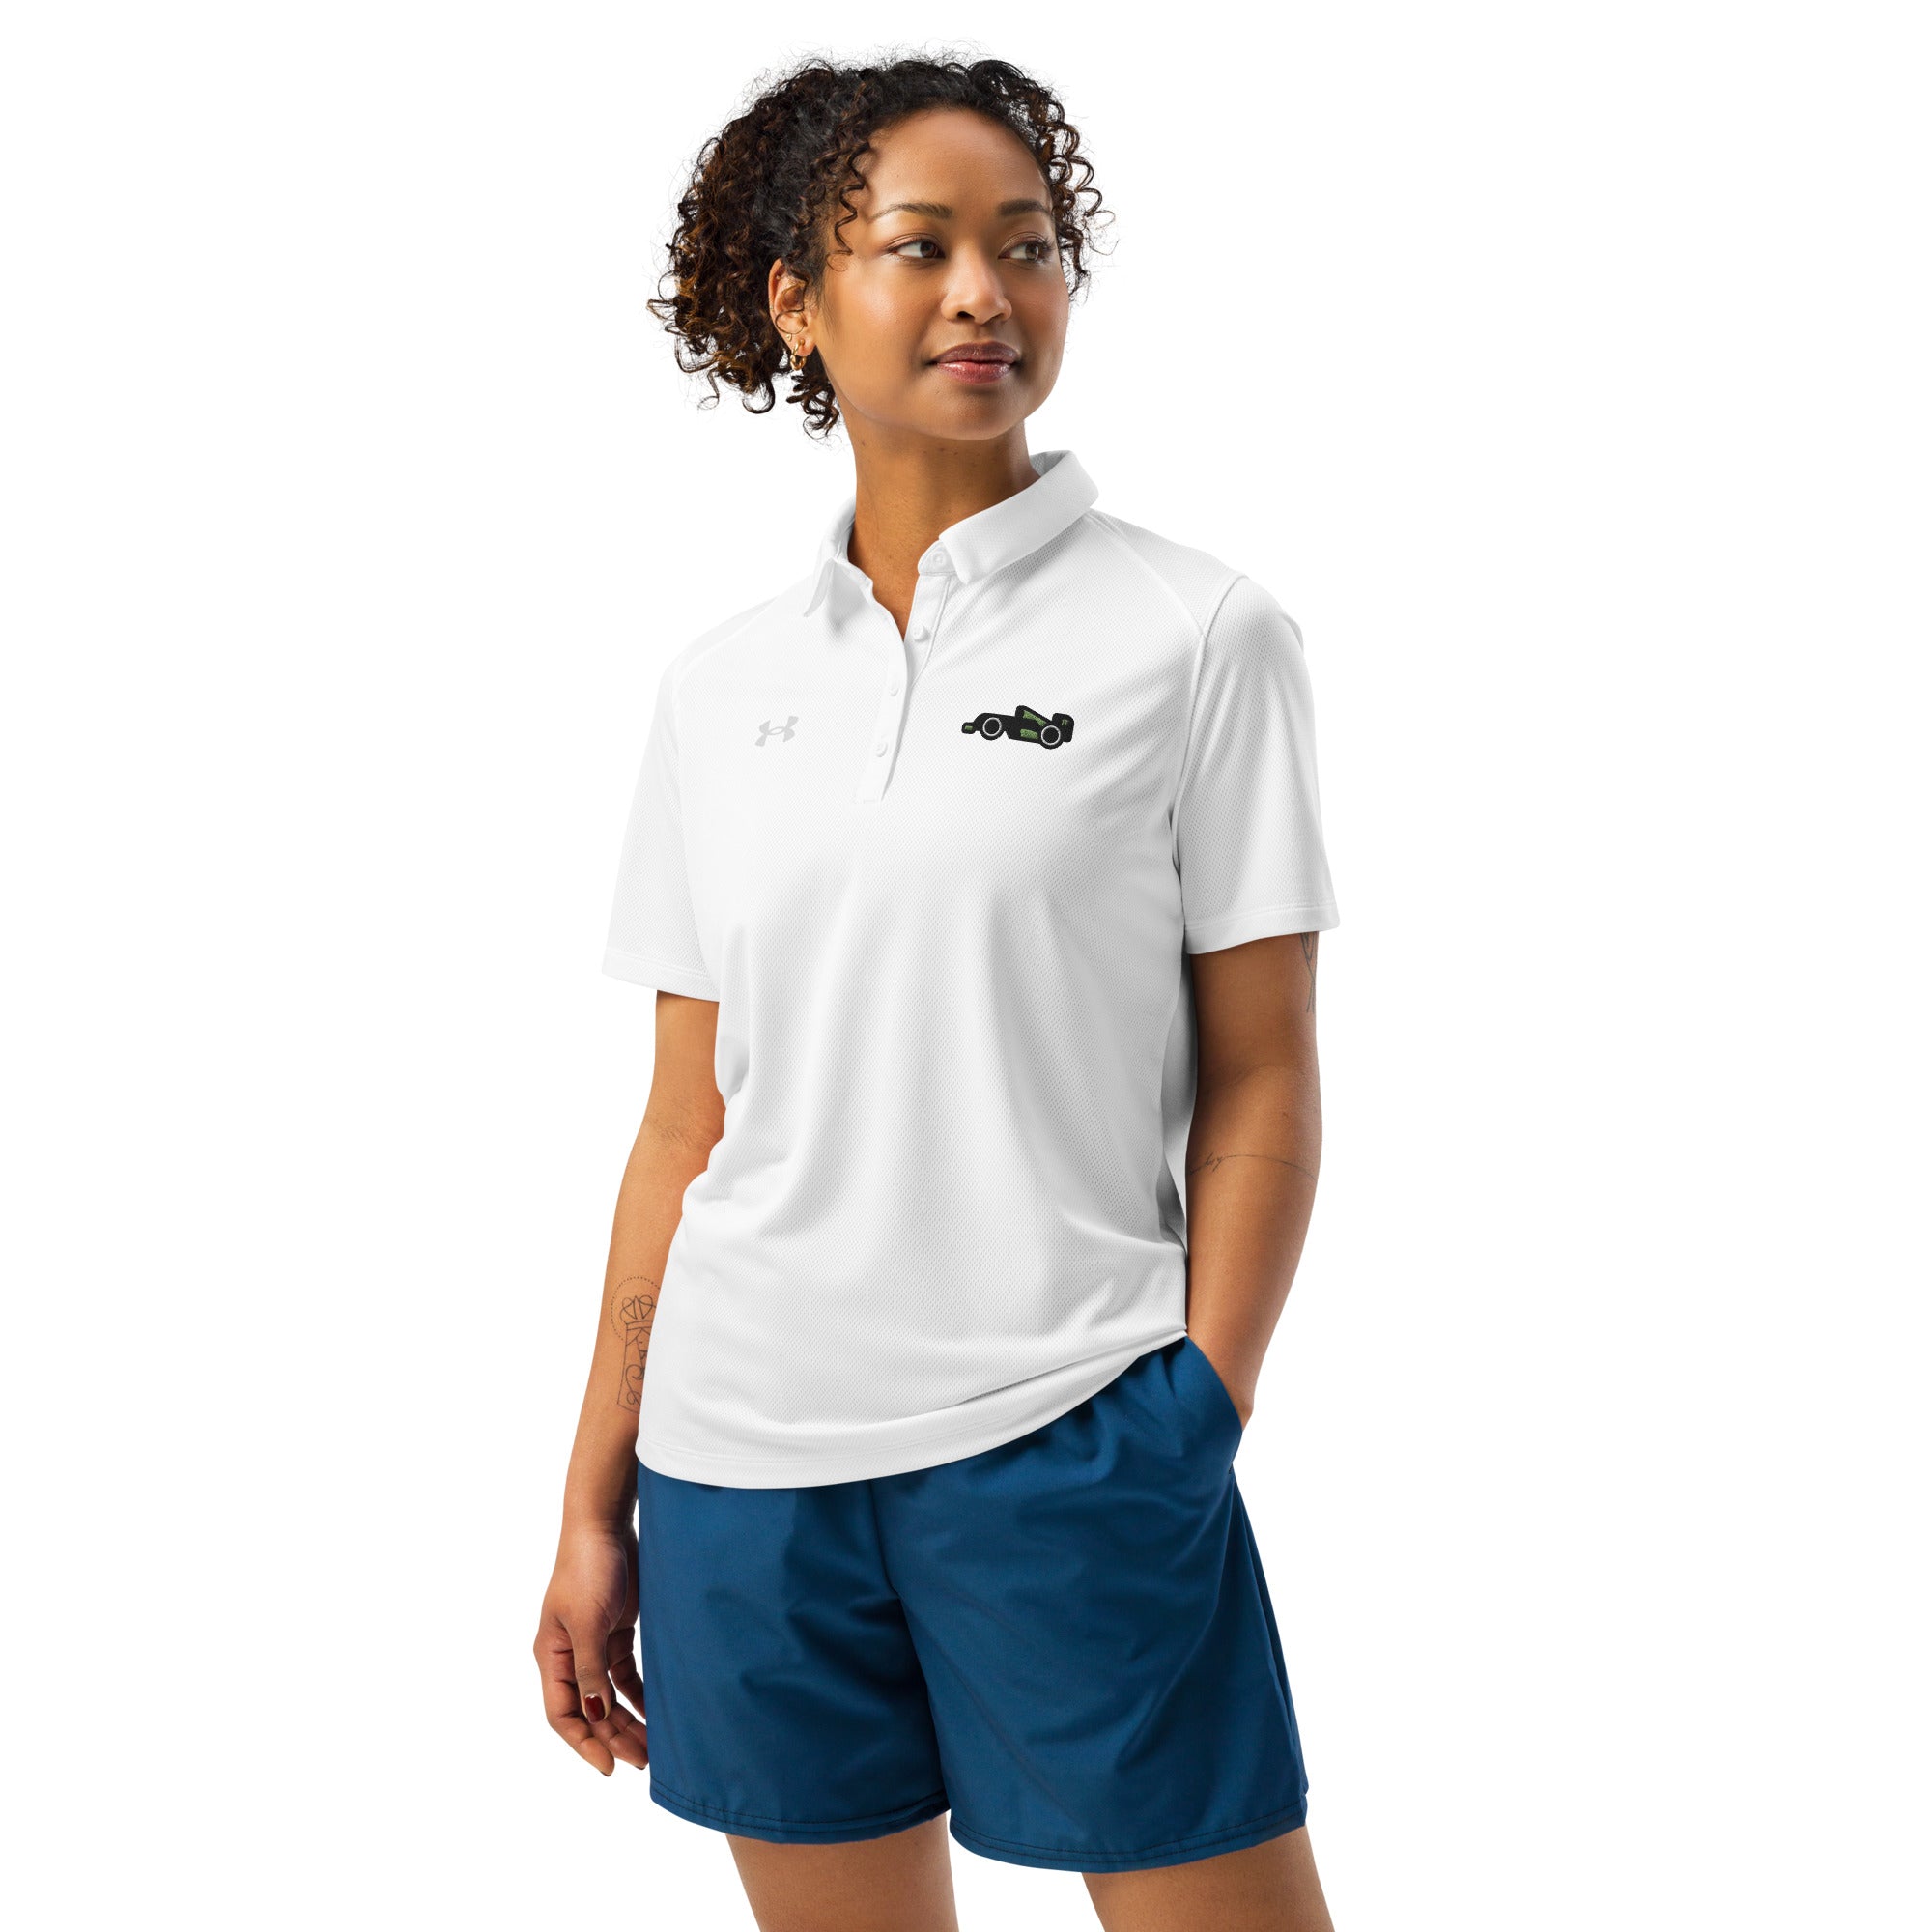 Embroidered Black/Green Racing Car Under Armour® Women’s Polo